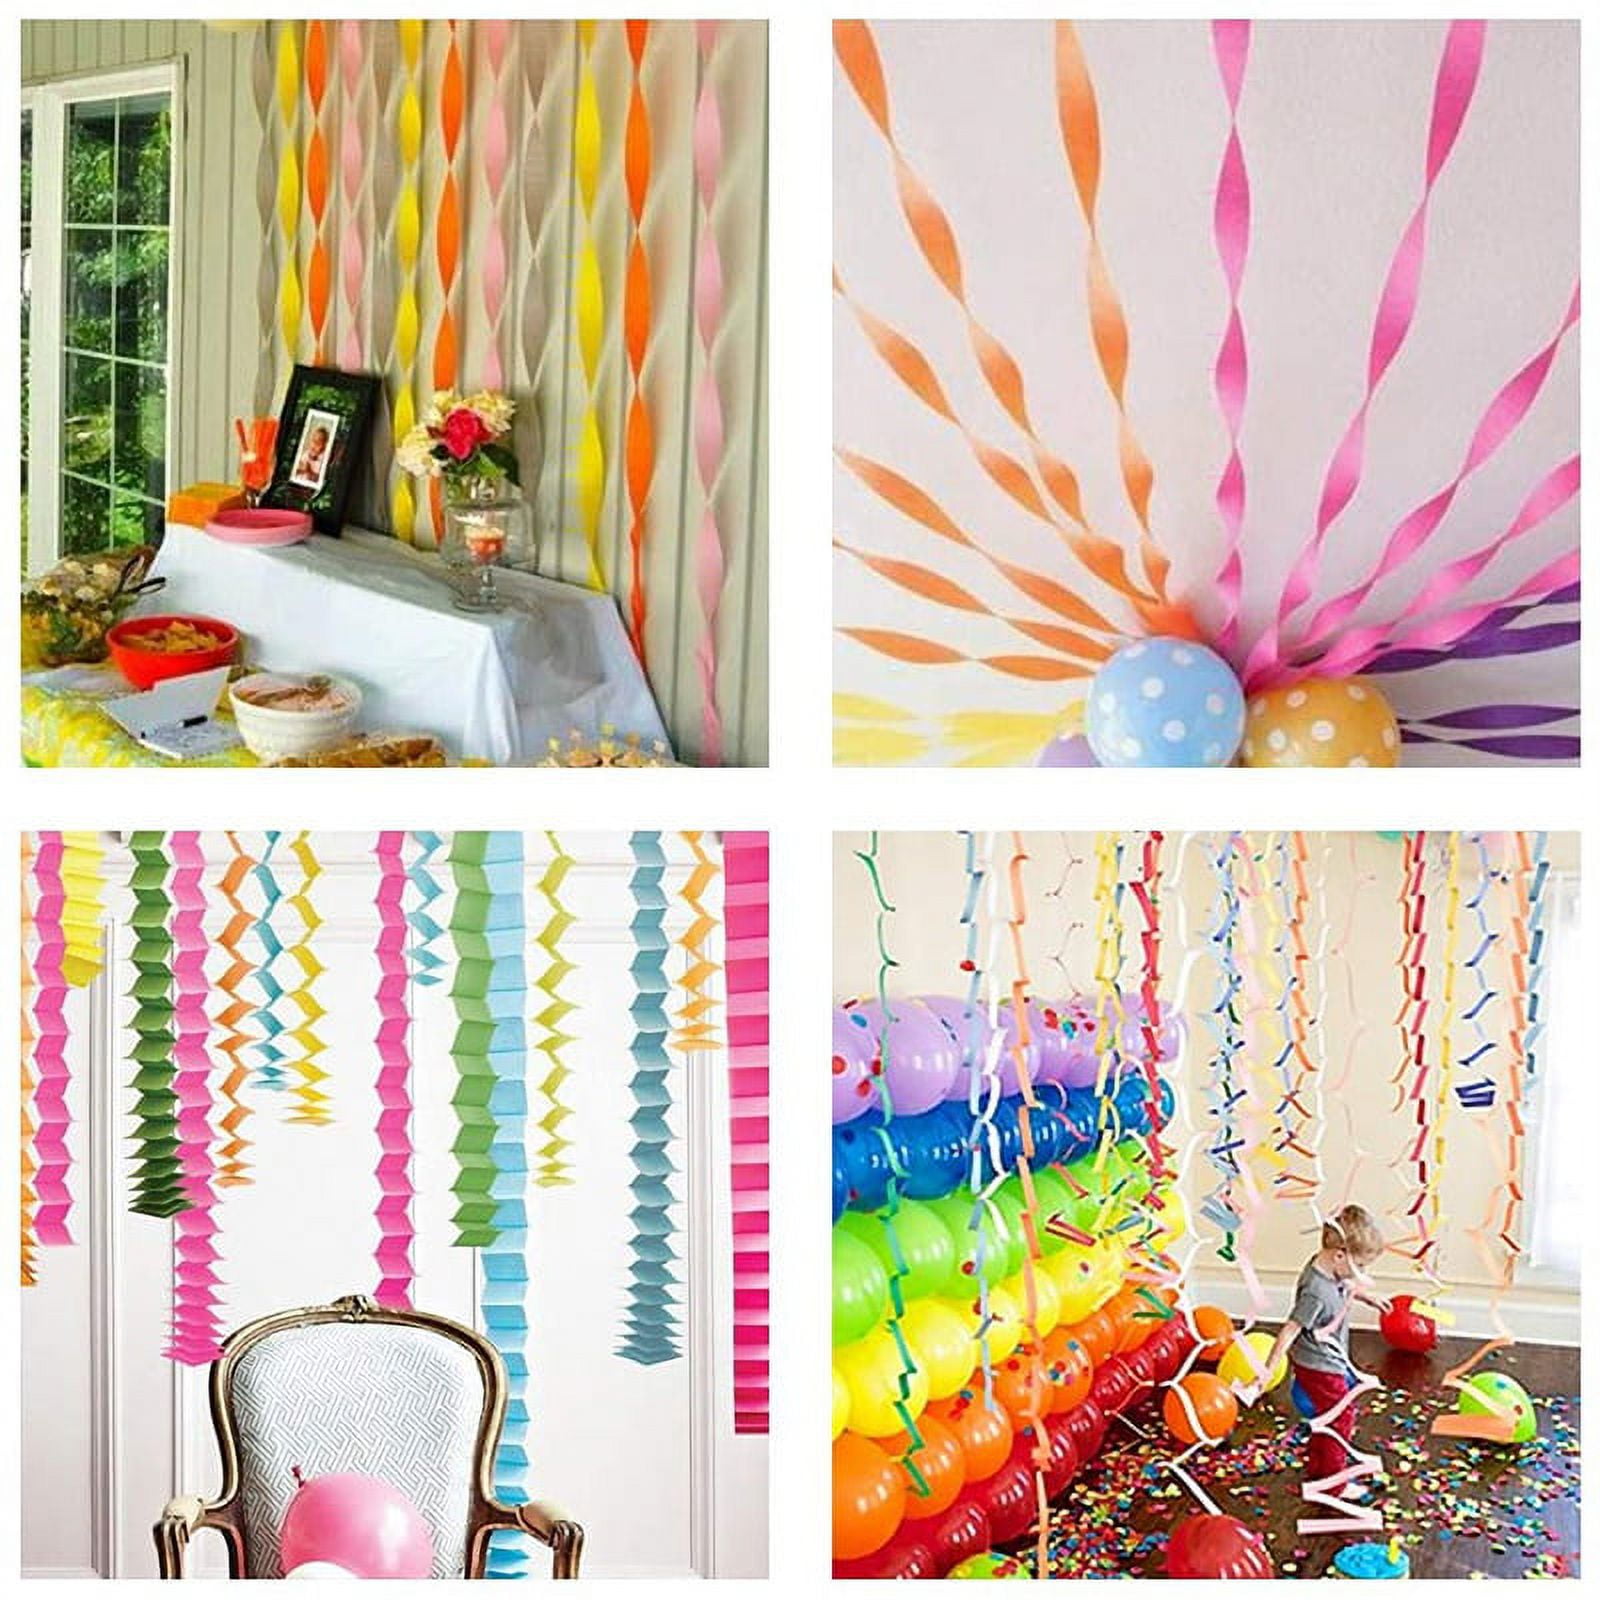 Buy Wholesale China 12 Rolls Crepe Paper Decorations In 12 Colors